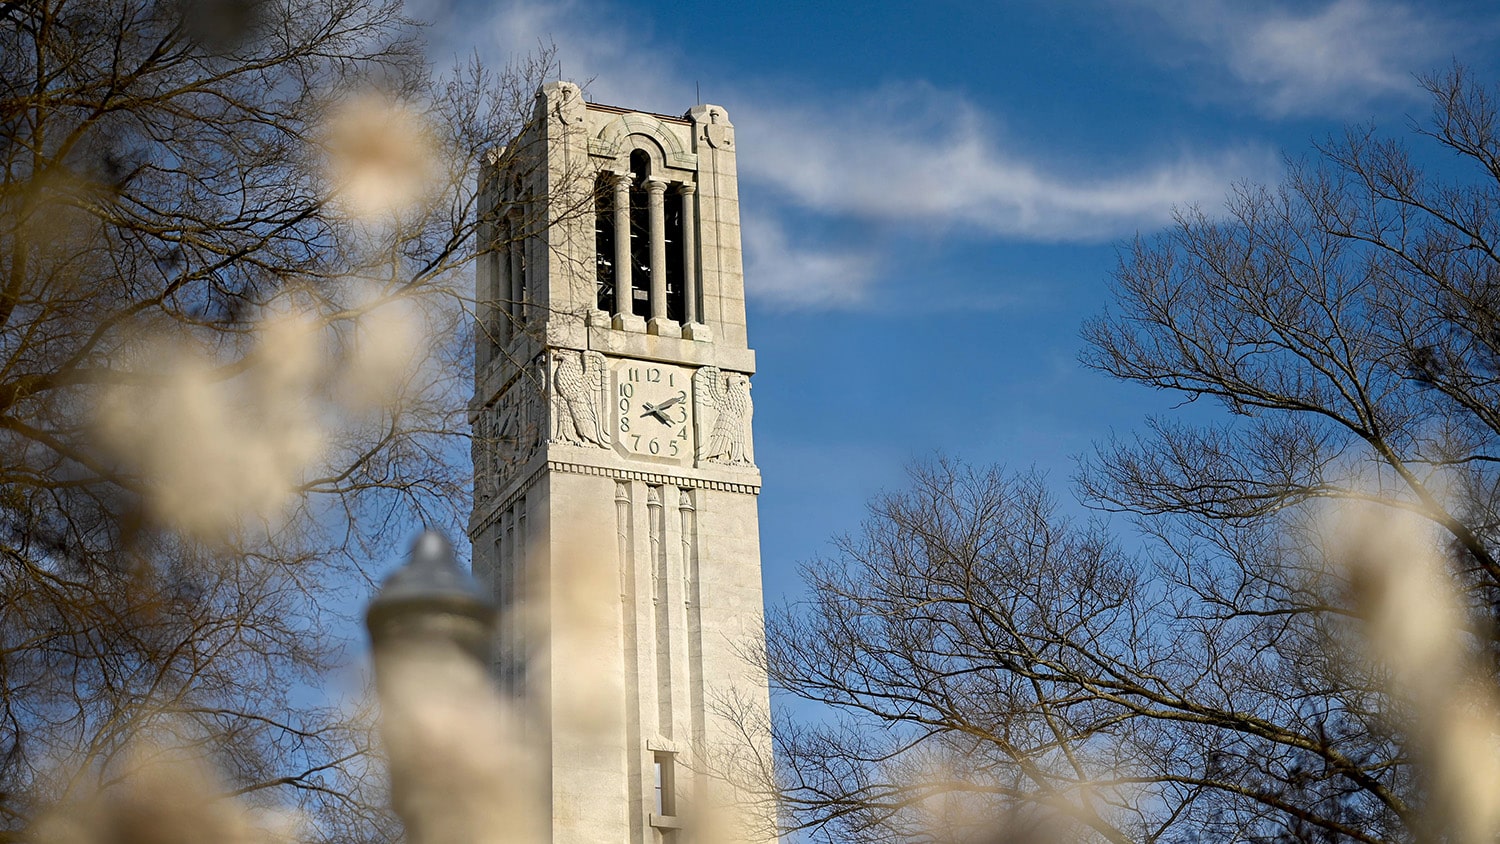 The Belltower, framed by early spring blooms in late February. Photo by Becky Kirkland.